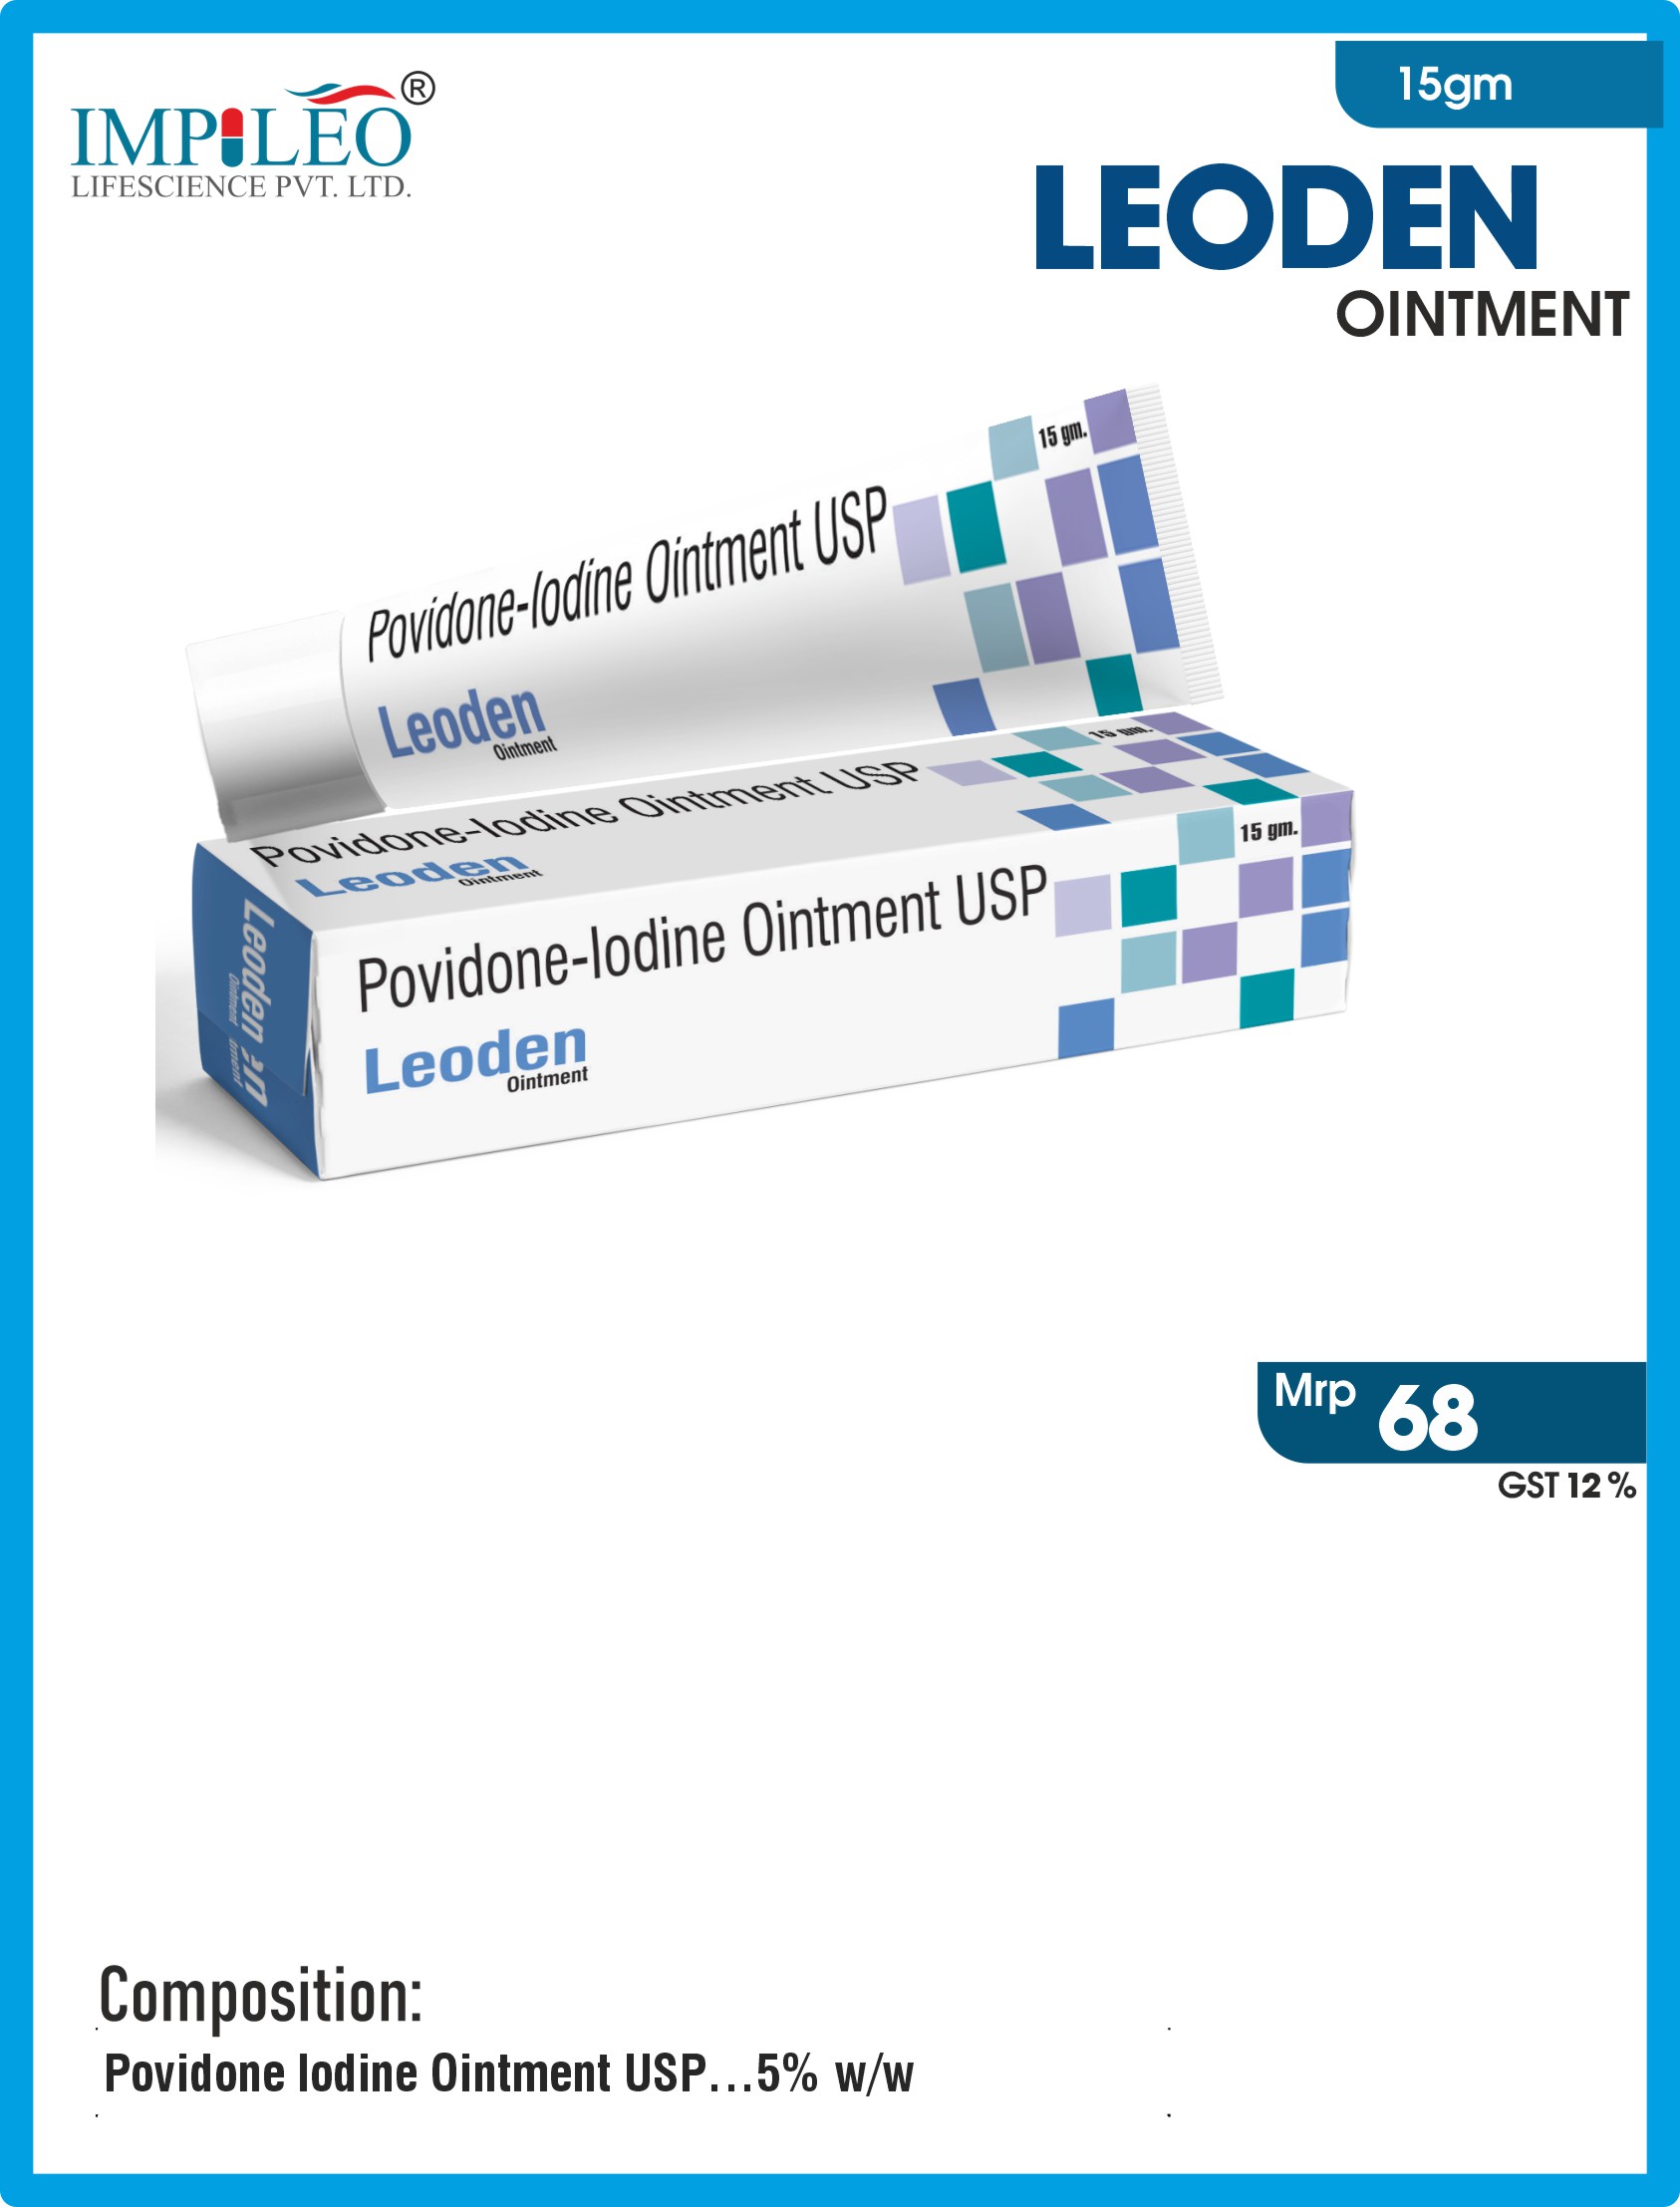 Get Effective LEODEN OINTMENT from Top PCD Pharma Franchise in India